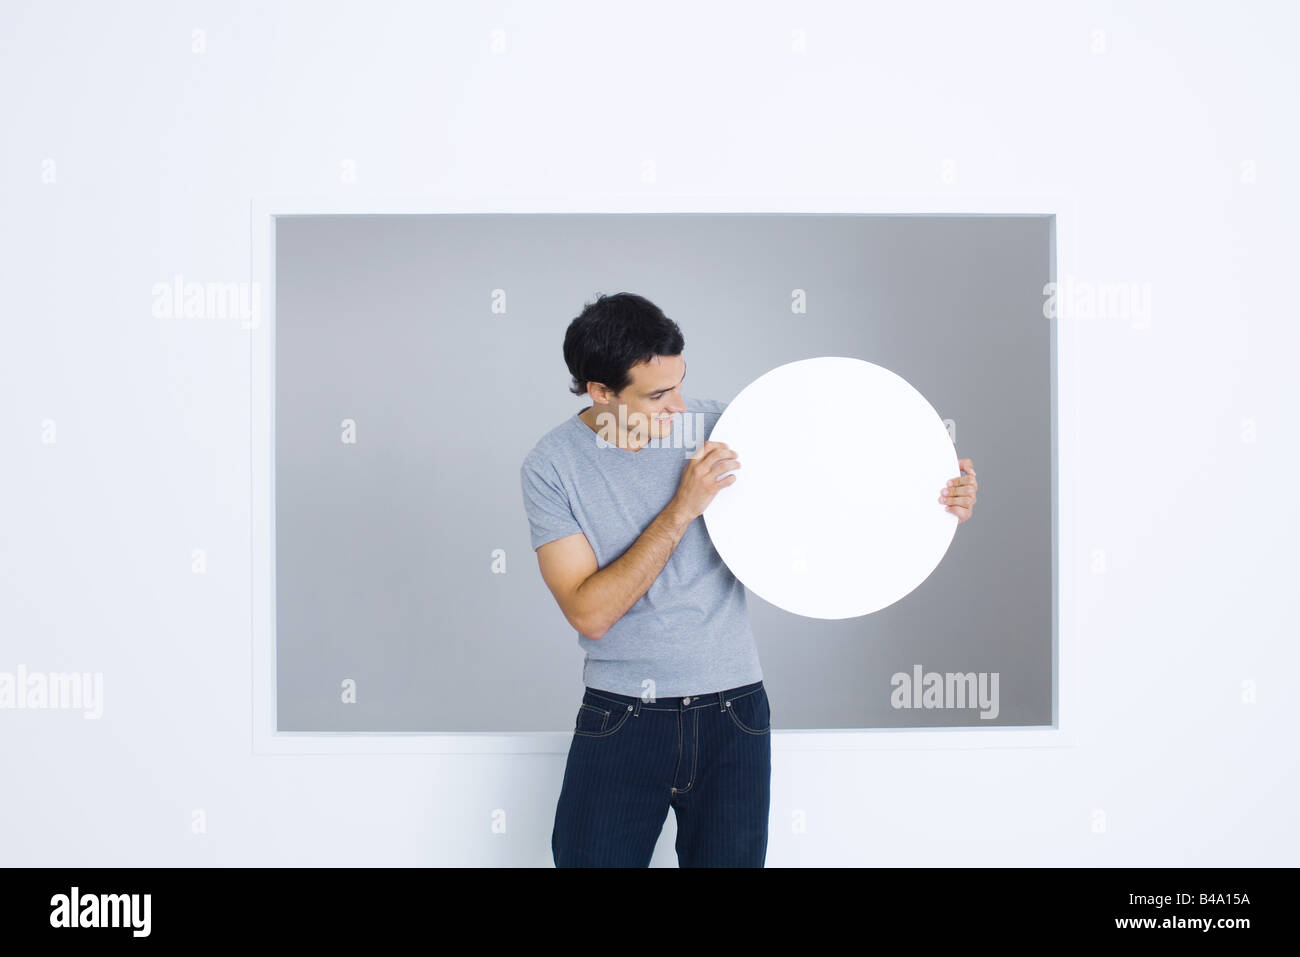 Man looking blank circular sign in hands, smiling Stock Photo